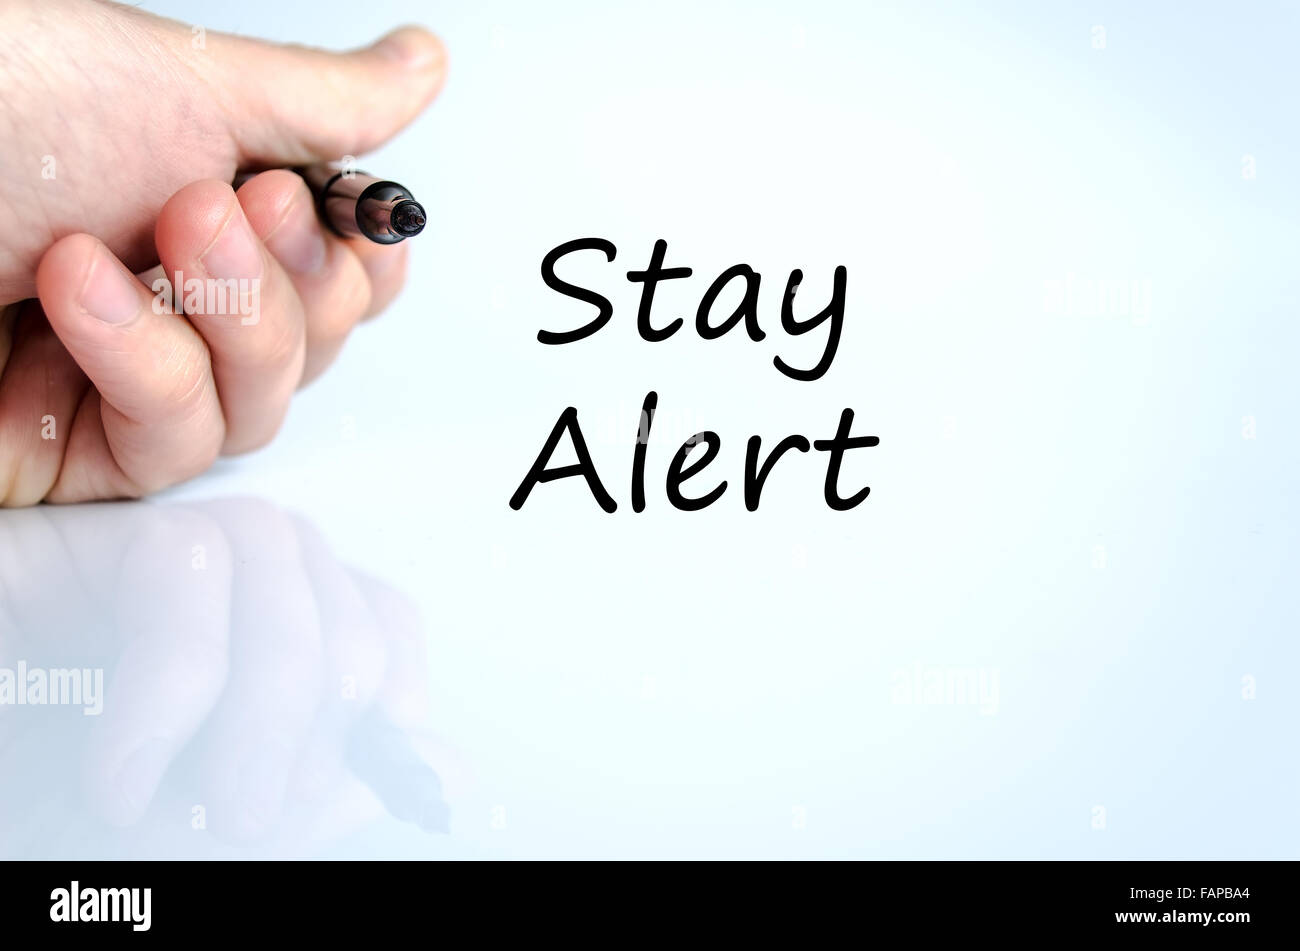 Stay alert text concept isolated over white background Stock Photo